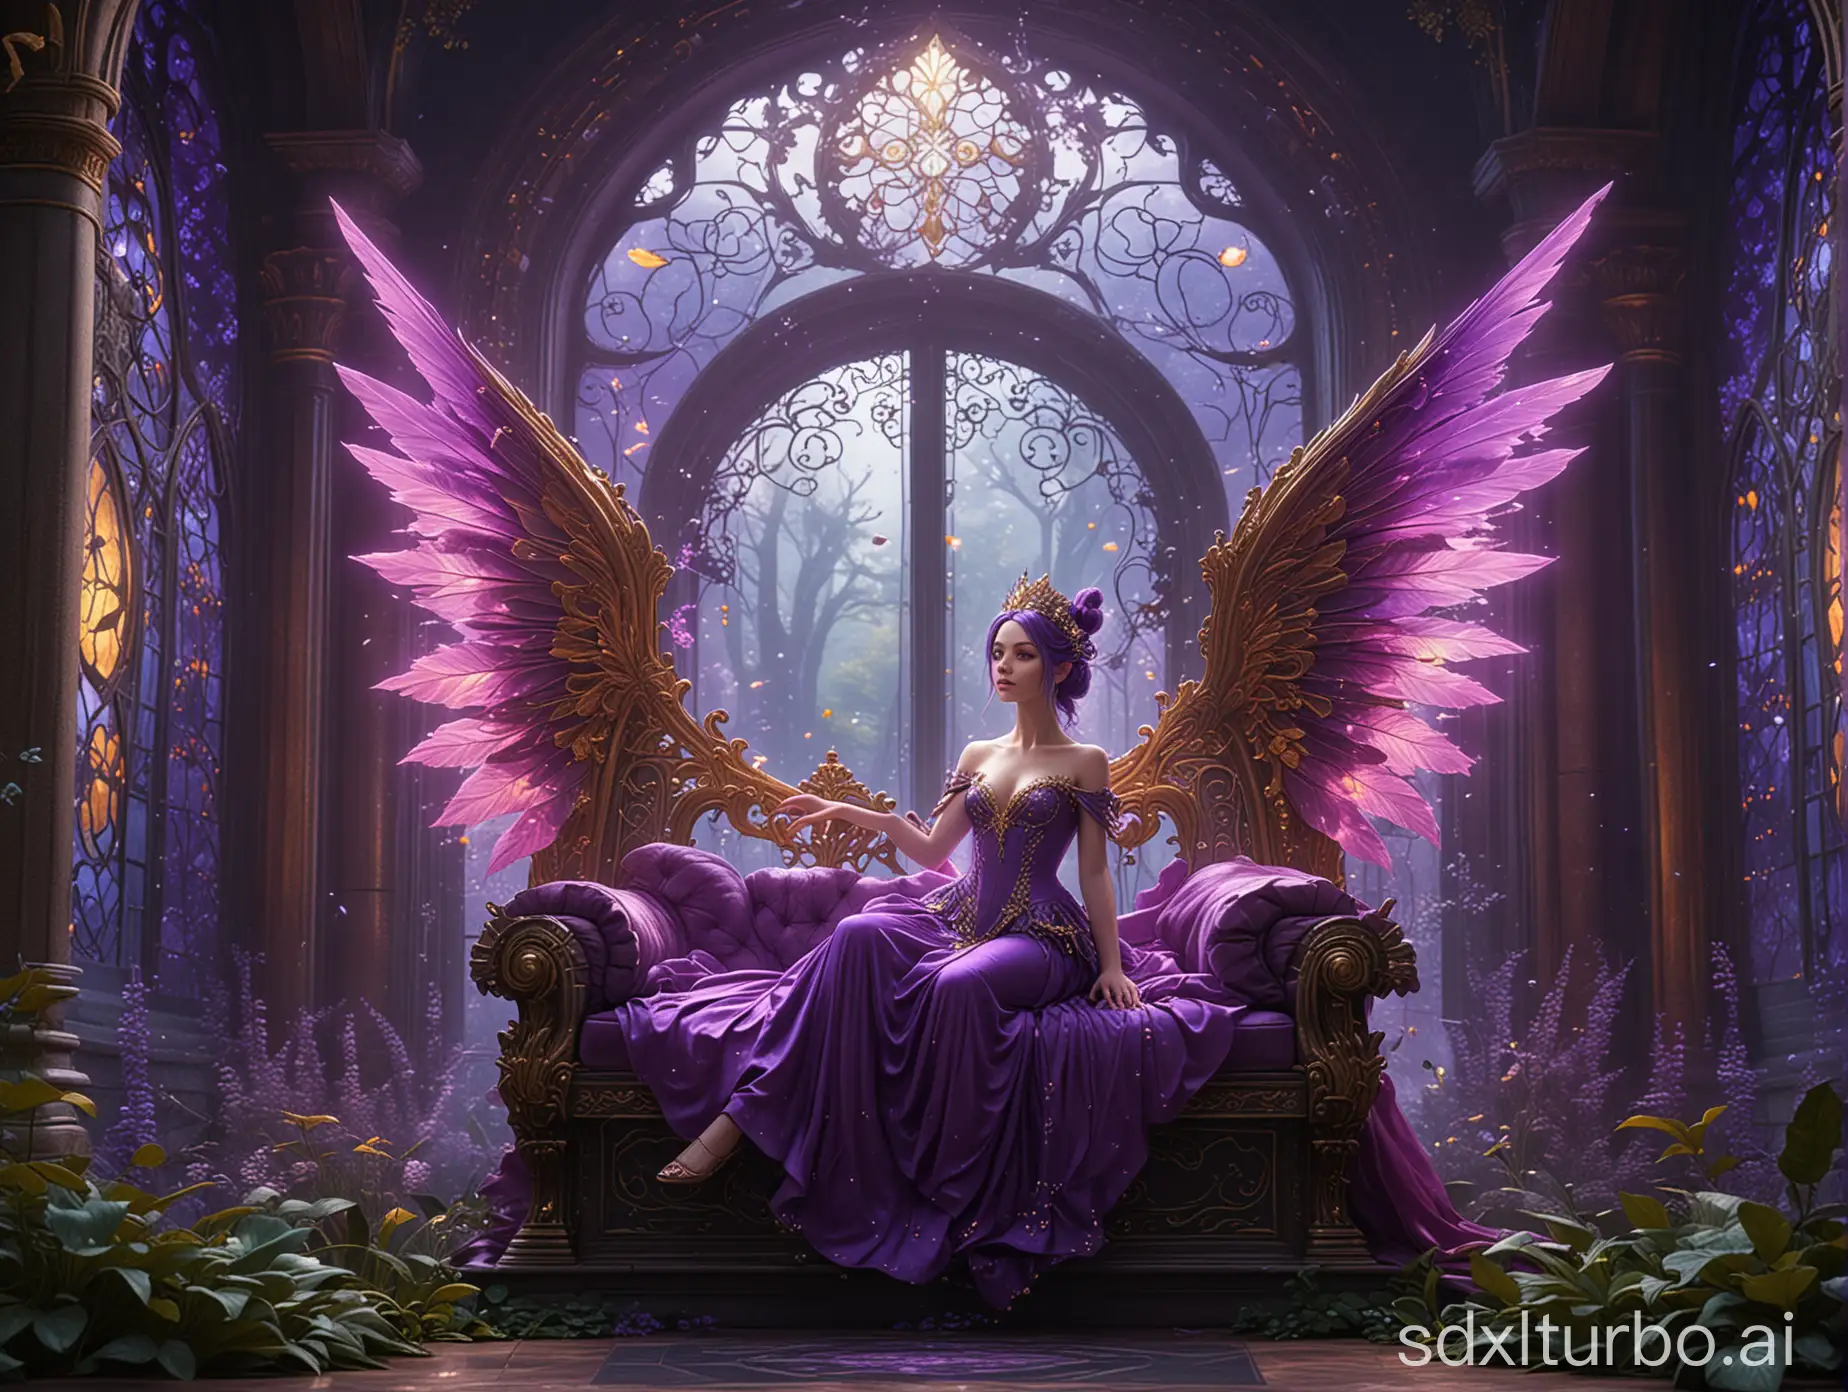 Enchanting-3D-Render-Majestic-Fairy-on-Ornate-Throne-in-Vivid-Palace-Setting